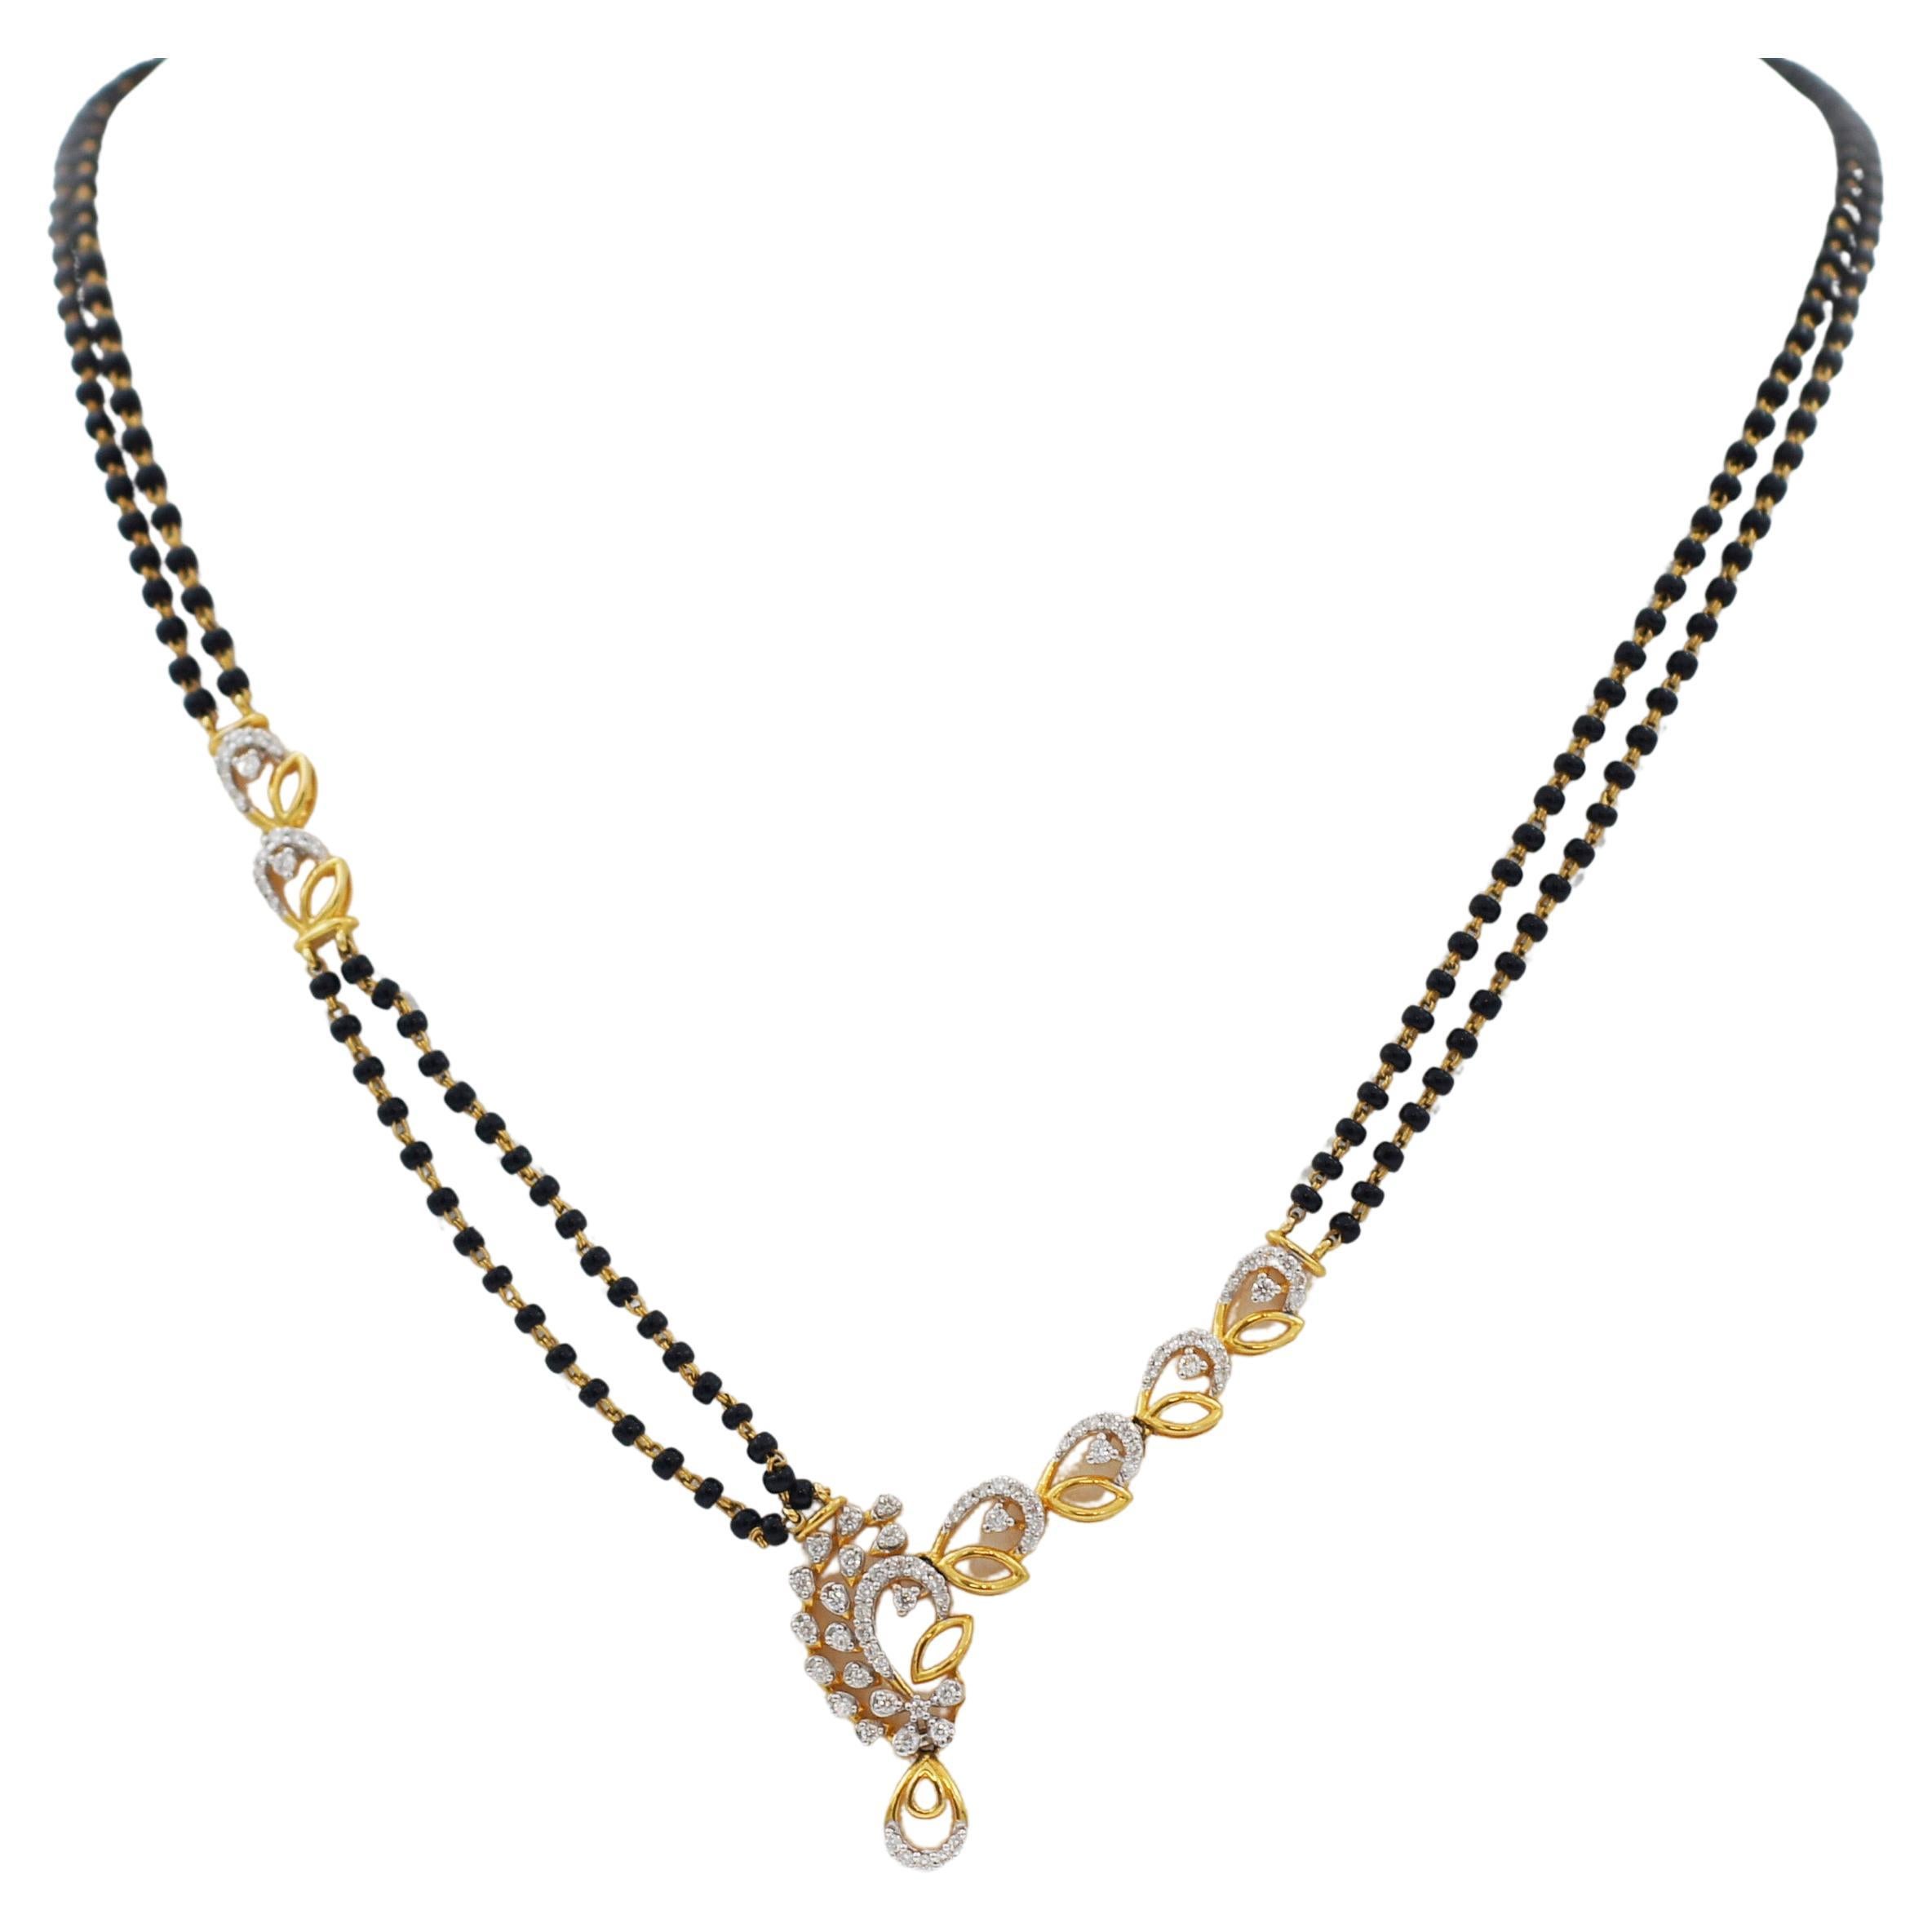 22k Indian Yellow Gold Diamonds and Black Bead Mangalsutra Necklace